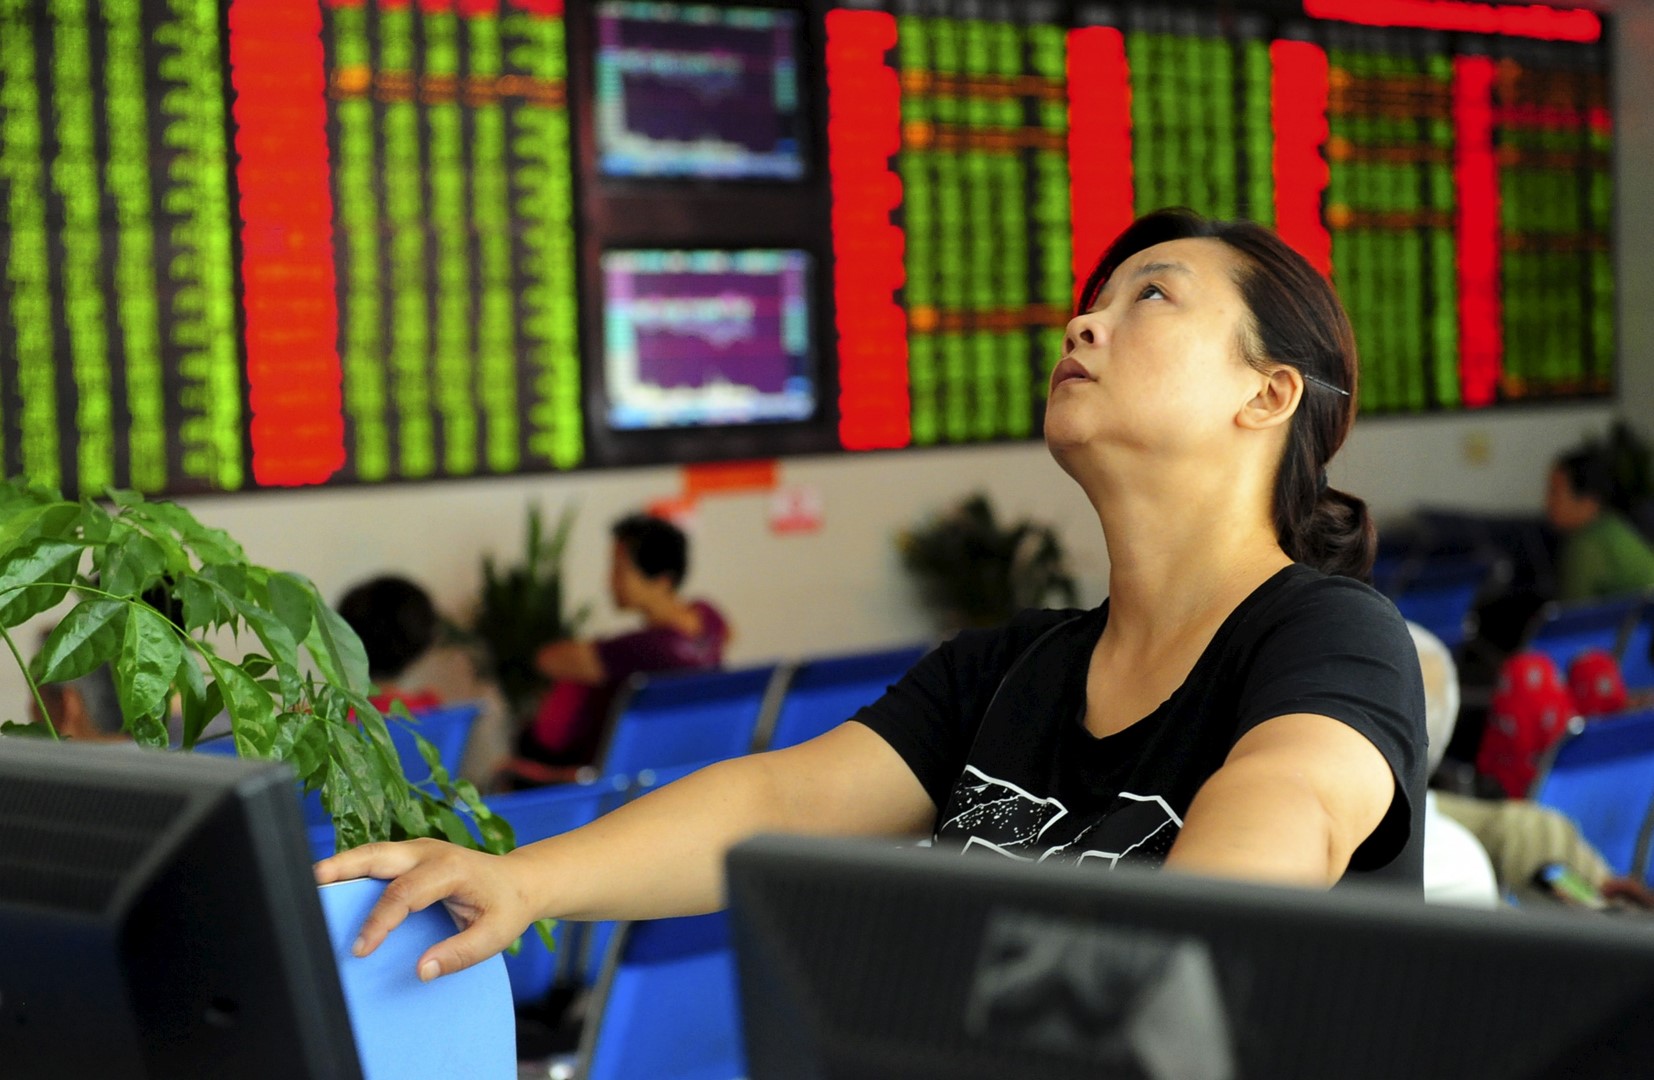 An investor looks up in front of an electronic board showing stock information at a brokerage house in Fuyang, Anhui province, China August 21, 2015. China stock markets tanked more than 4 percent on Friday, taking weekly losses for the main indexes to nearly 12 percent and casting doubt over Beijing's ability to prevent another bout of panic selling as the market neared collapse again. REUTERS/China Daily CHINA OUT. NO COMMERCIAL OR EDITORIAL SALES IN CHINA - GF10000178232